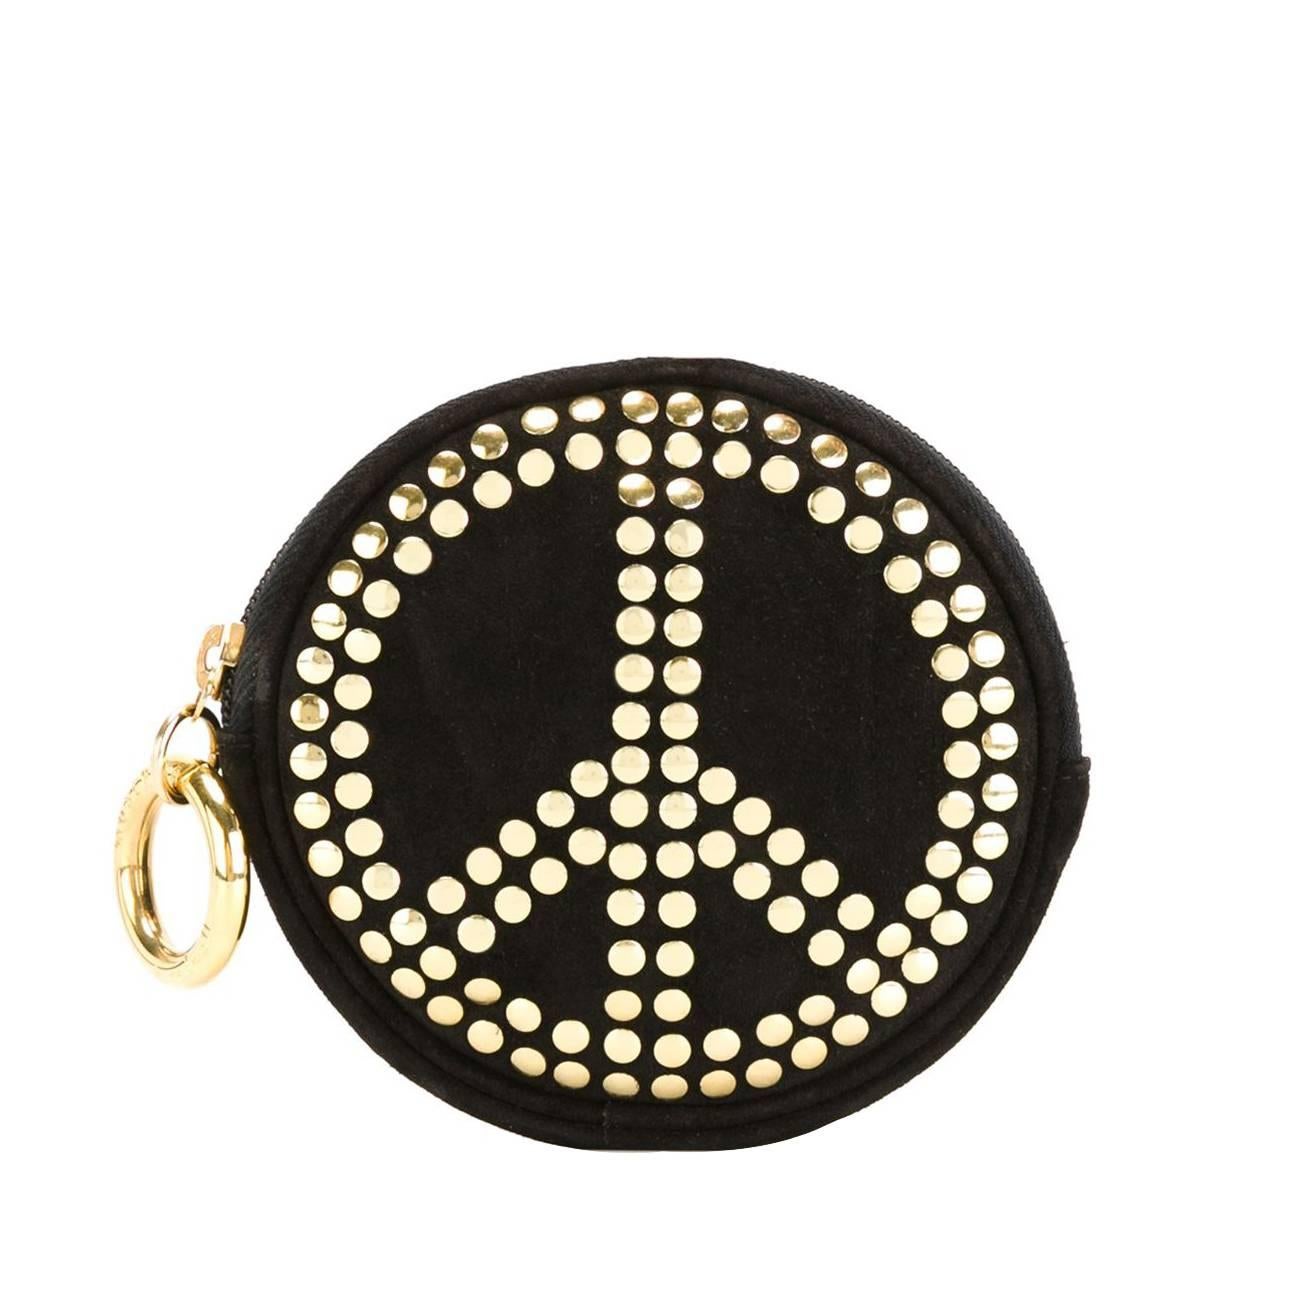 Moschino Vintage "Peace" Pattern Pouch